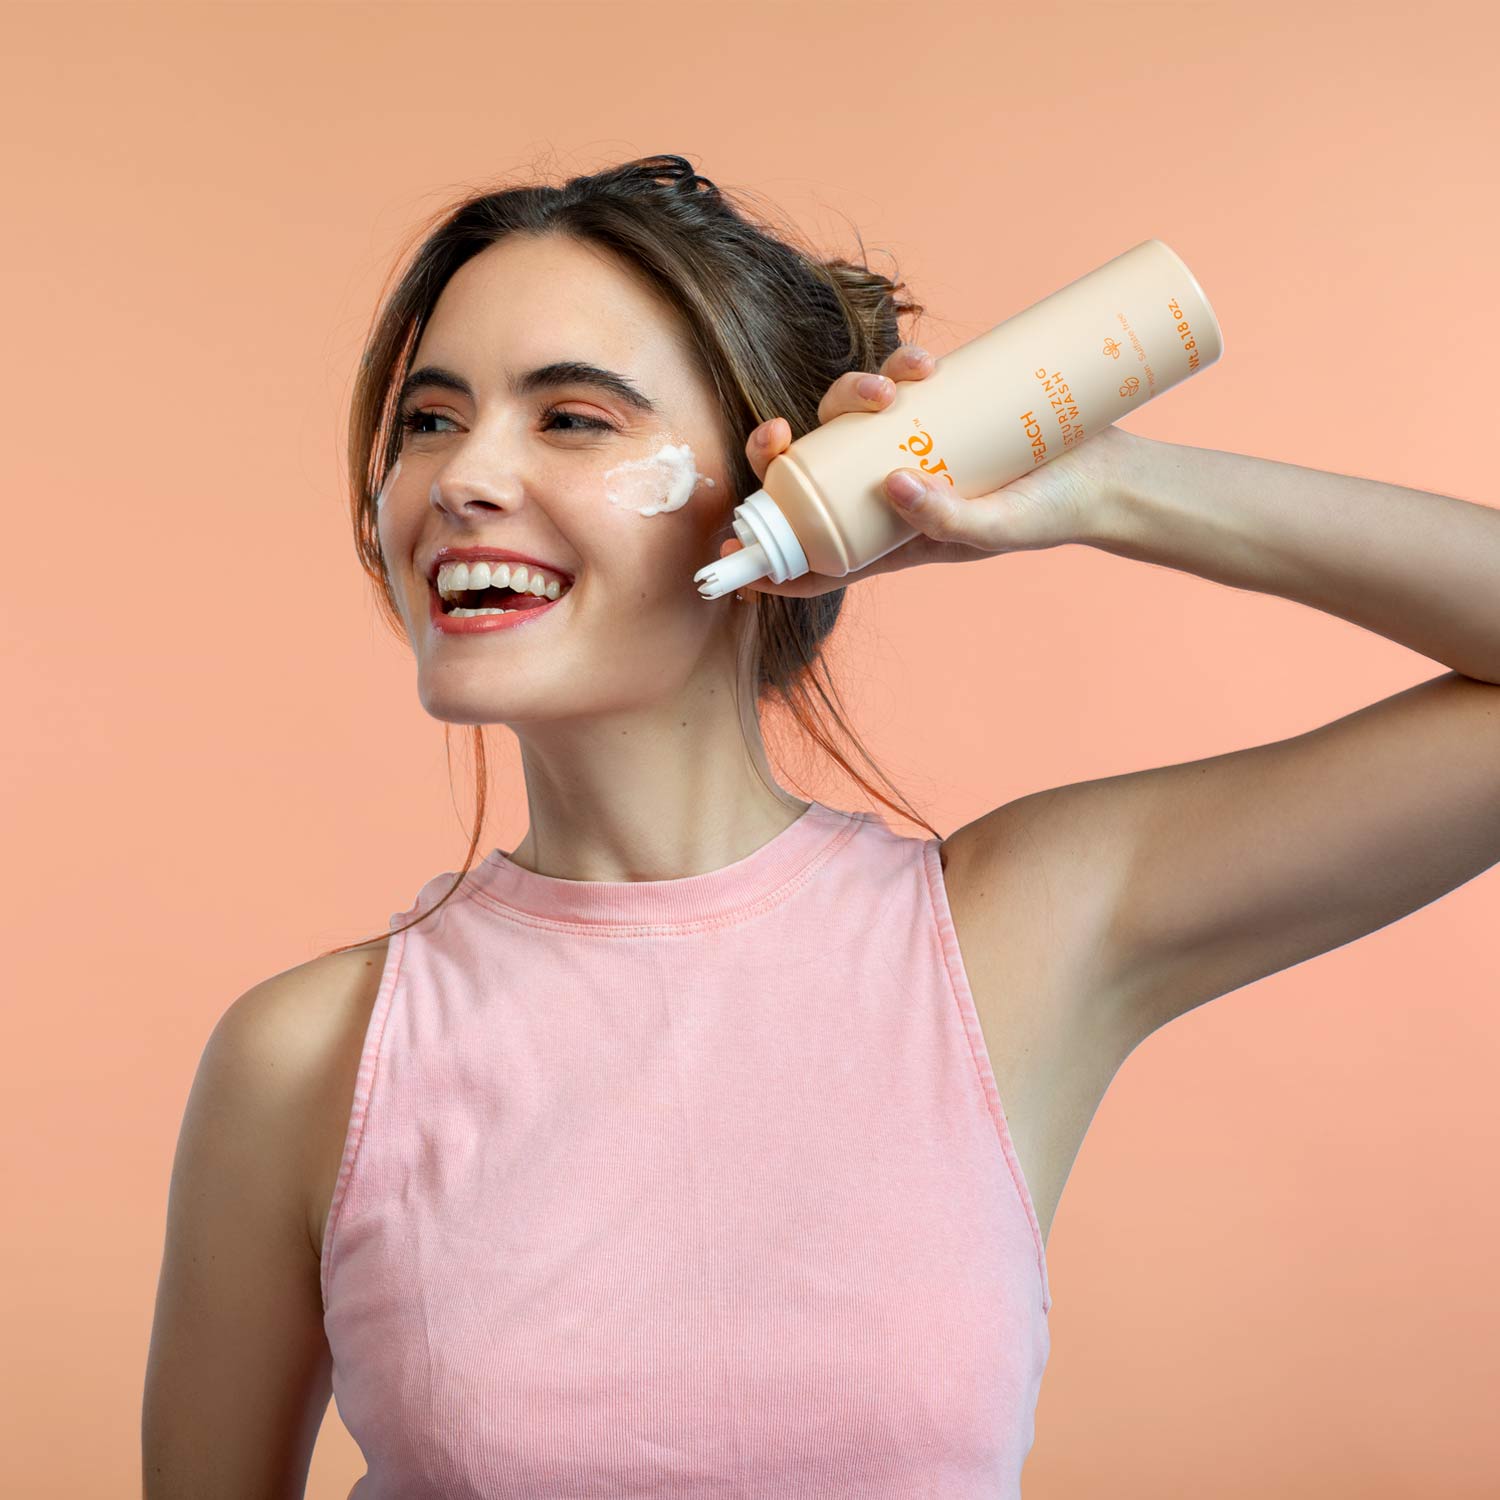 Image of a smiling girl holding the peach-scented Mecré moisturizing body wash bottle, with a foam trail on her cheek.